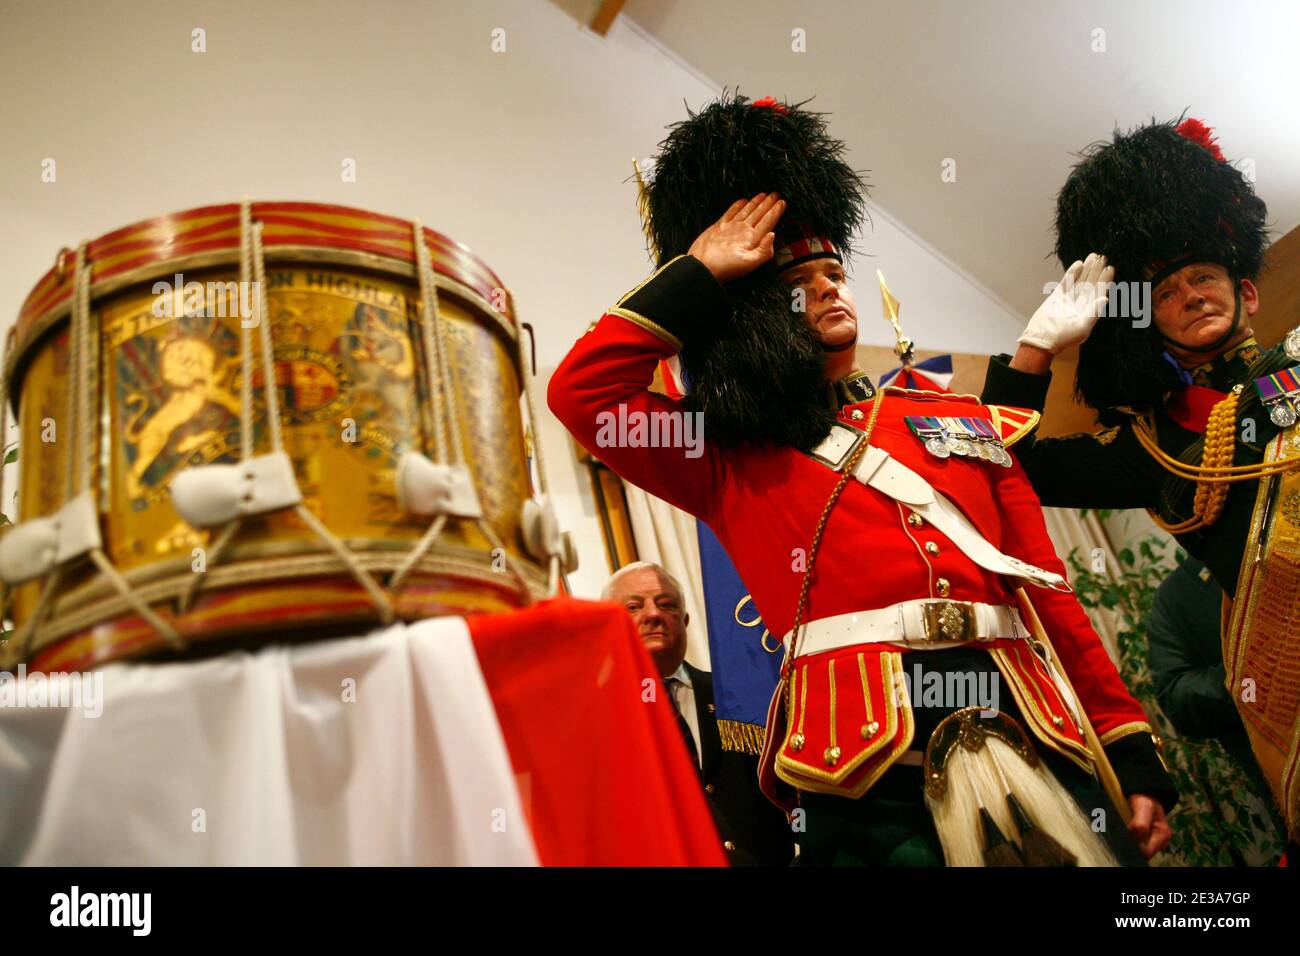 The Gordon Highlanders drum, which was was buried in a farmer's field by a British soldier of the 4th Battalion as the Gordons, during the British Army's retreat to Dunkirk in the Second World War, is made ready to be returned representatives of the Gordon Highlanders Museum based in Aberdeen, Scotland, at a ceremony held in Hem, northern France on 12 November 2010. Media reports state that it has been revealed that, within hours of the 4th Battalion as the Gordons leaving the village of Hem in northern France, during their retreat to the Dunkirk beachhead the drum was found by French policema Stock Photo